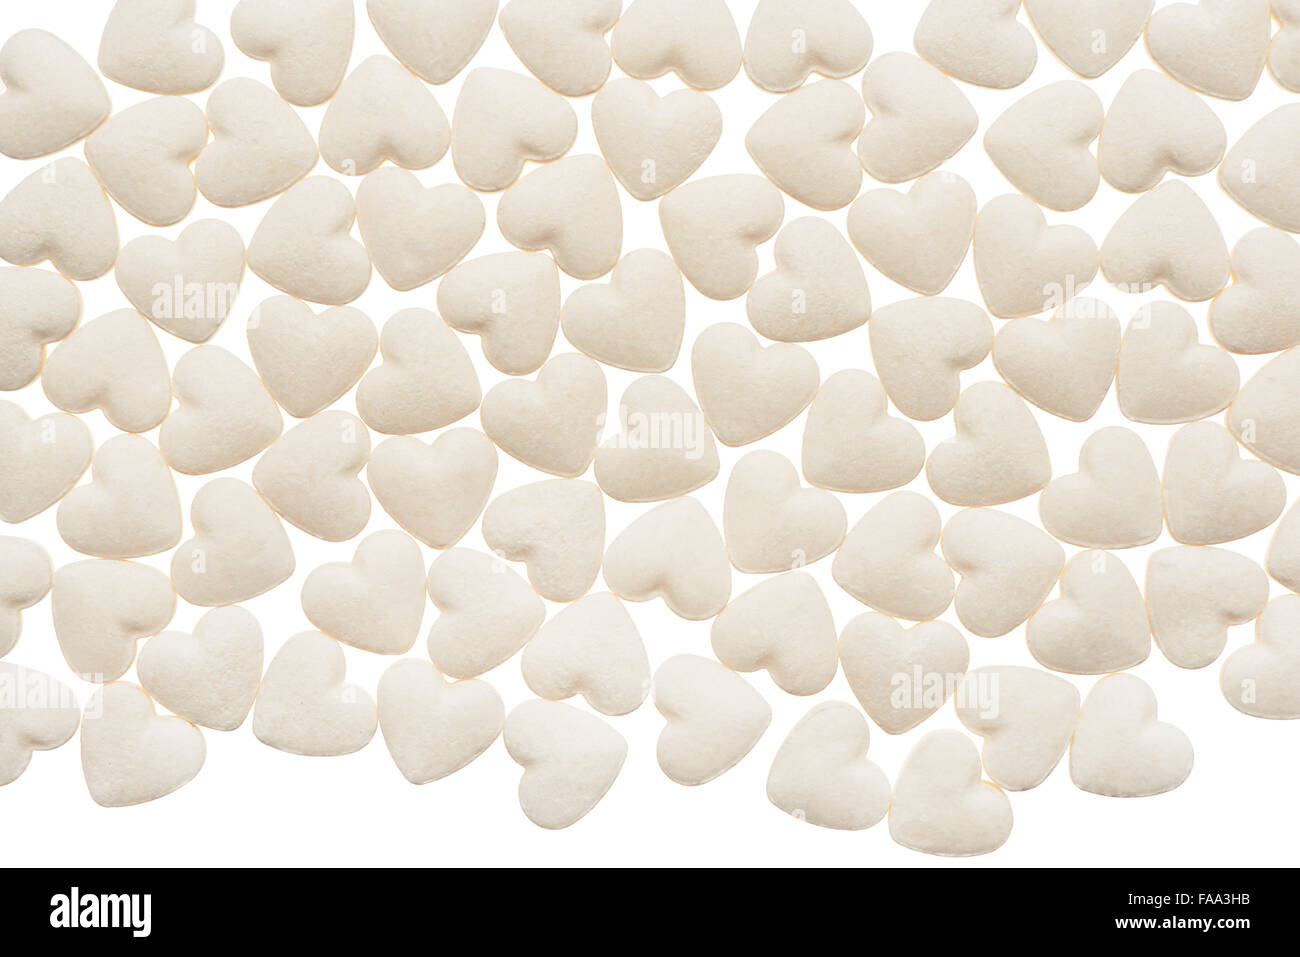 White heart shape tablets isolated on white background Stock Photo